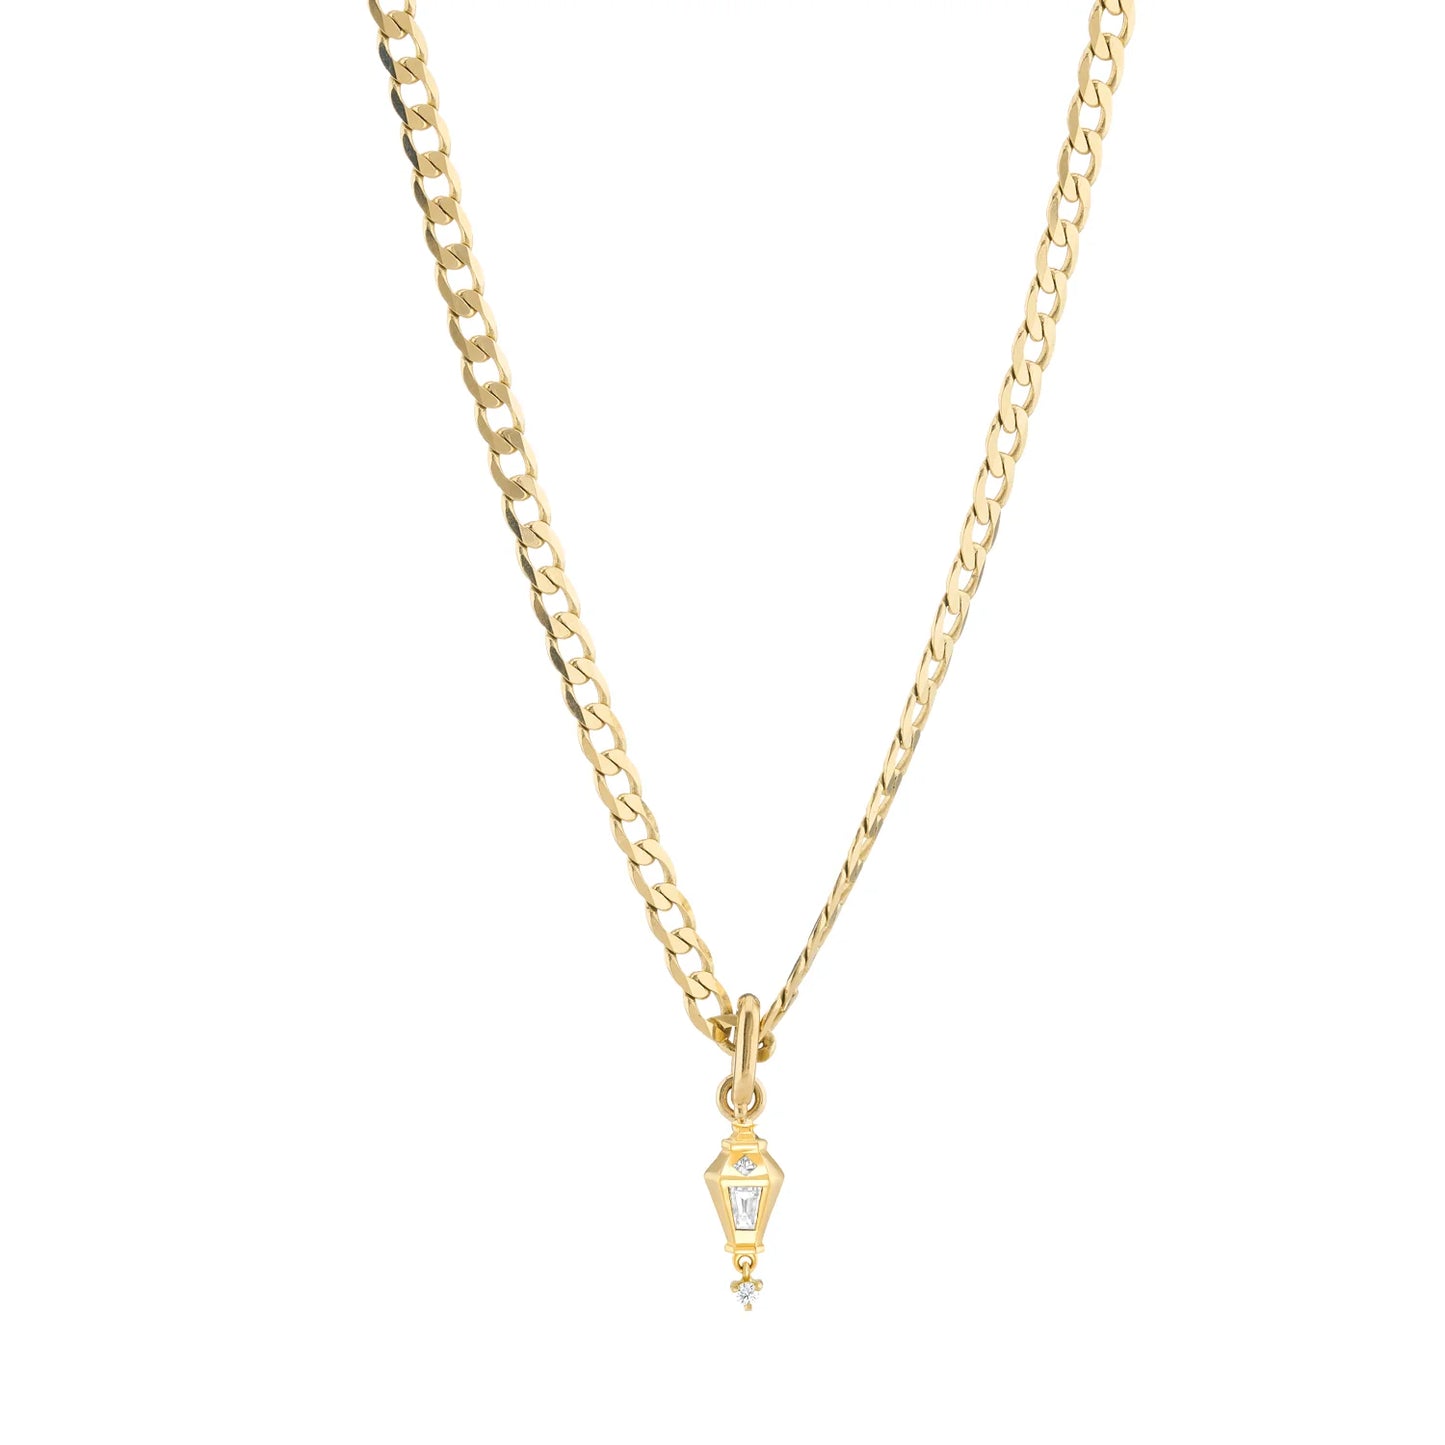 a lantern shaped gold pendant with white diamonds details on a gold curb chain on a white background